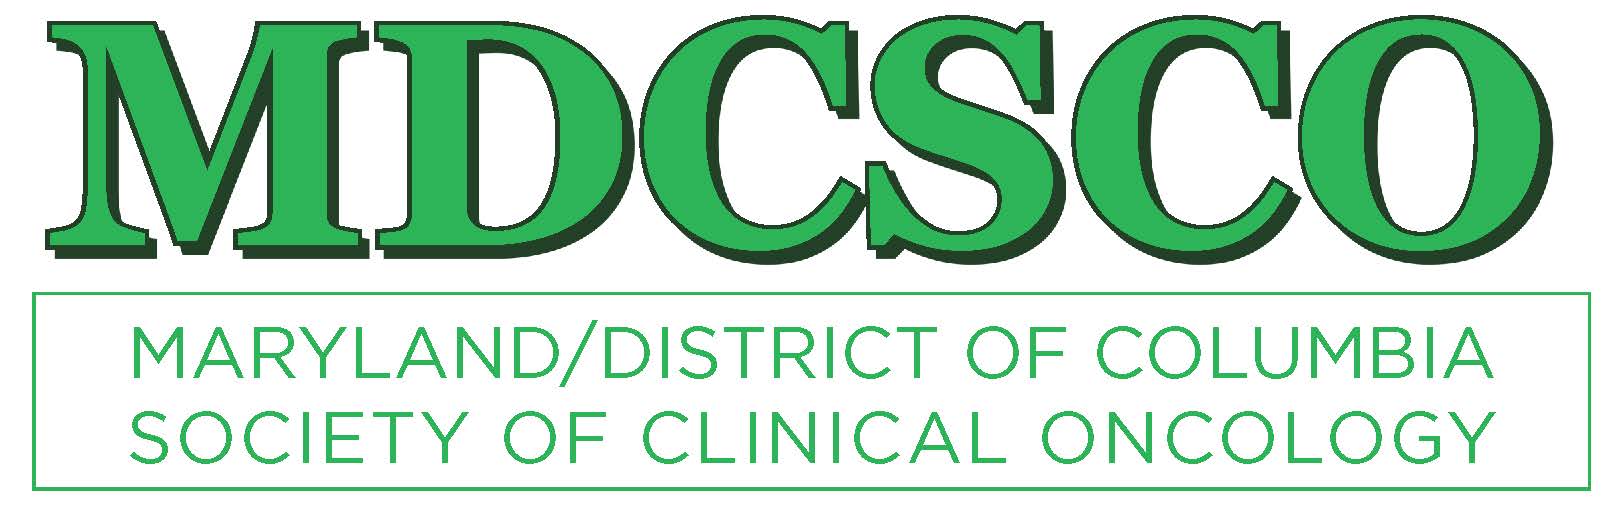 Maryland and DC Society of Clinical Oncology